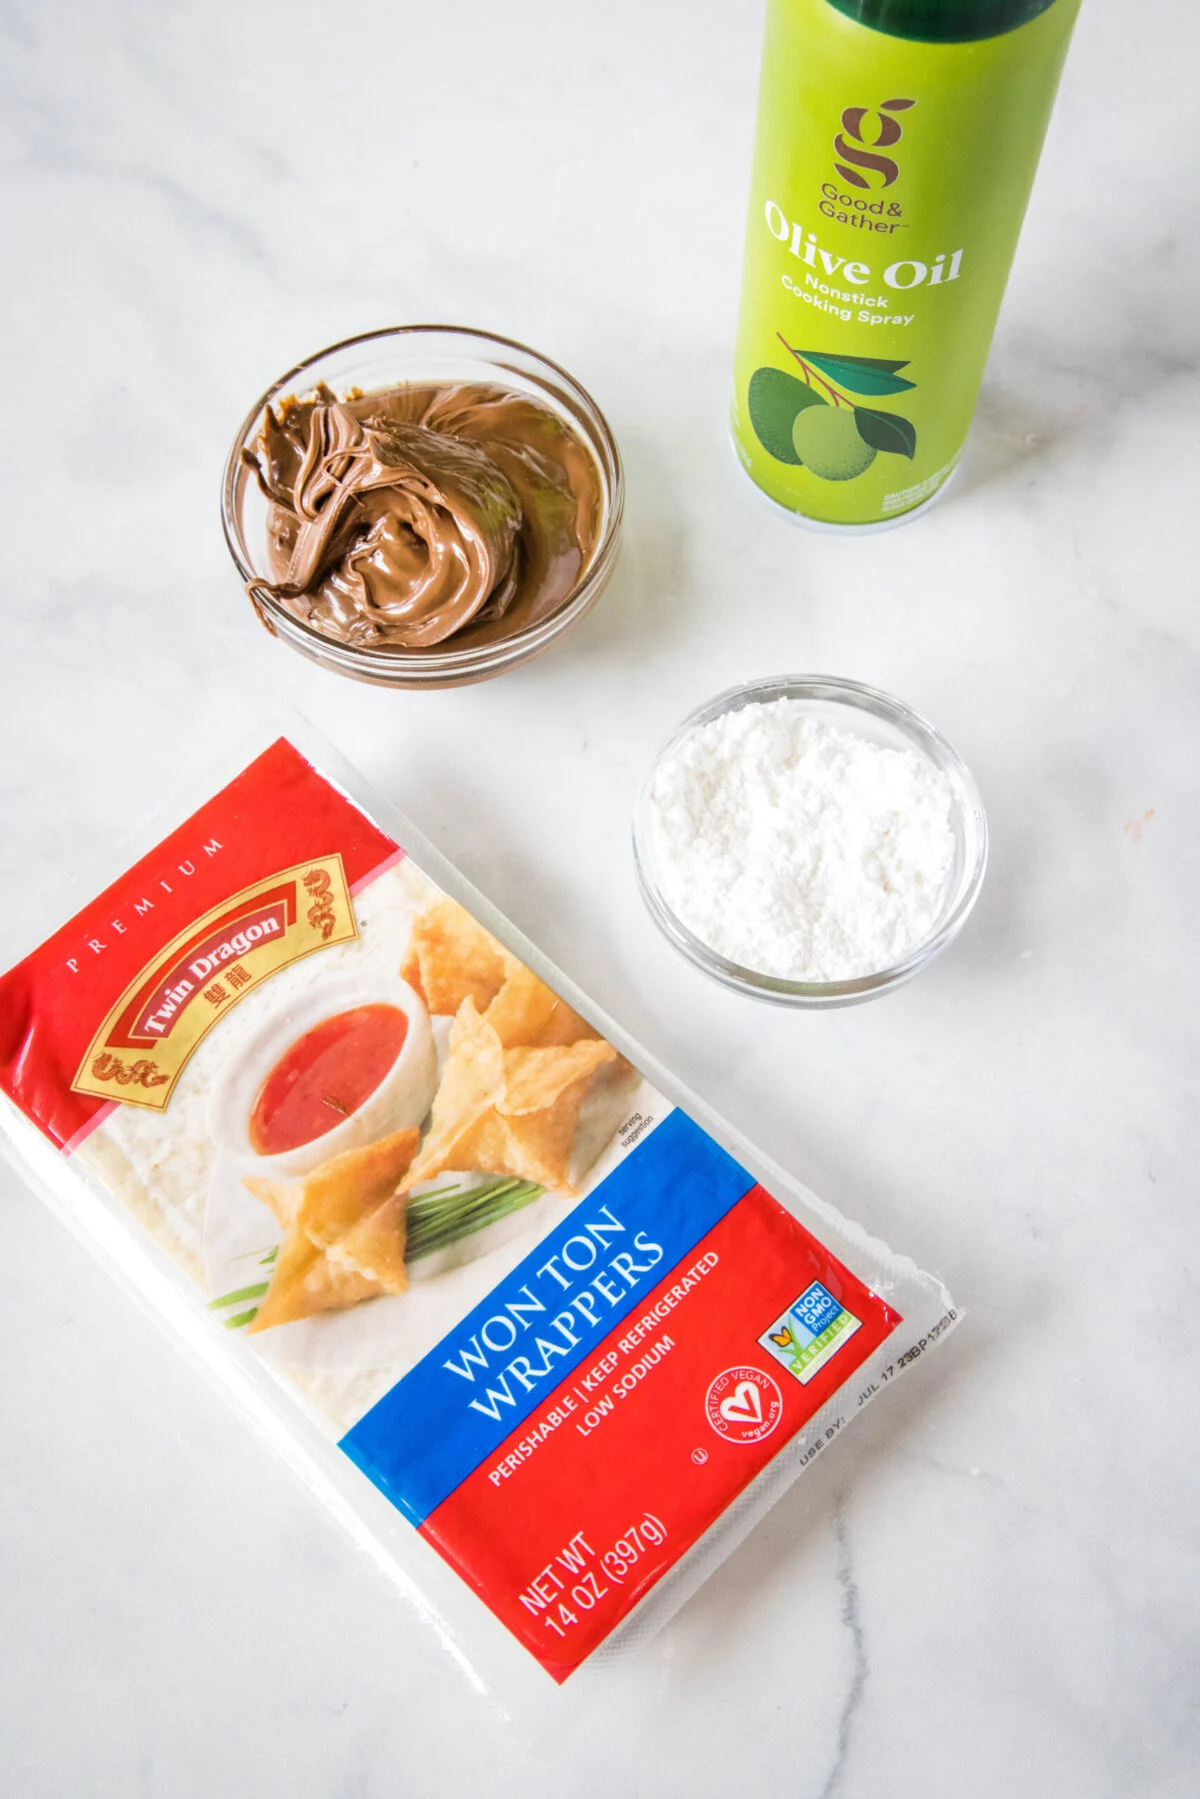 Overhead view of the ingredients needed for dessert wontons: a package of wonton wrappers, a bowl of Nutella, a bowl of powdered sugar, and a bottle of oil spray